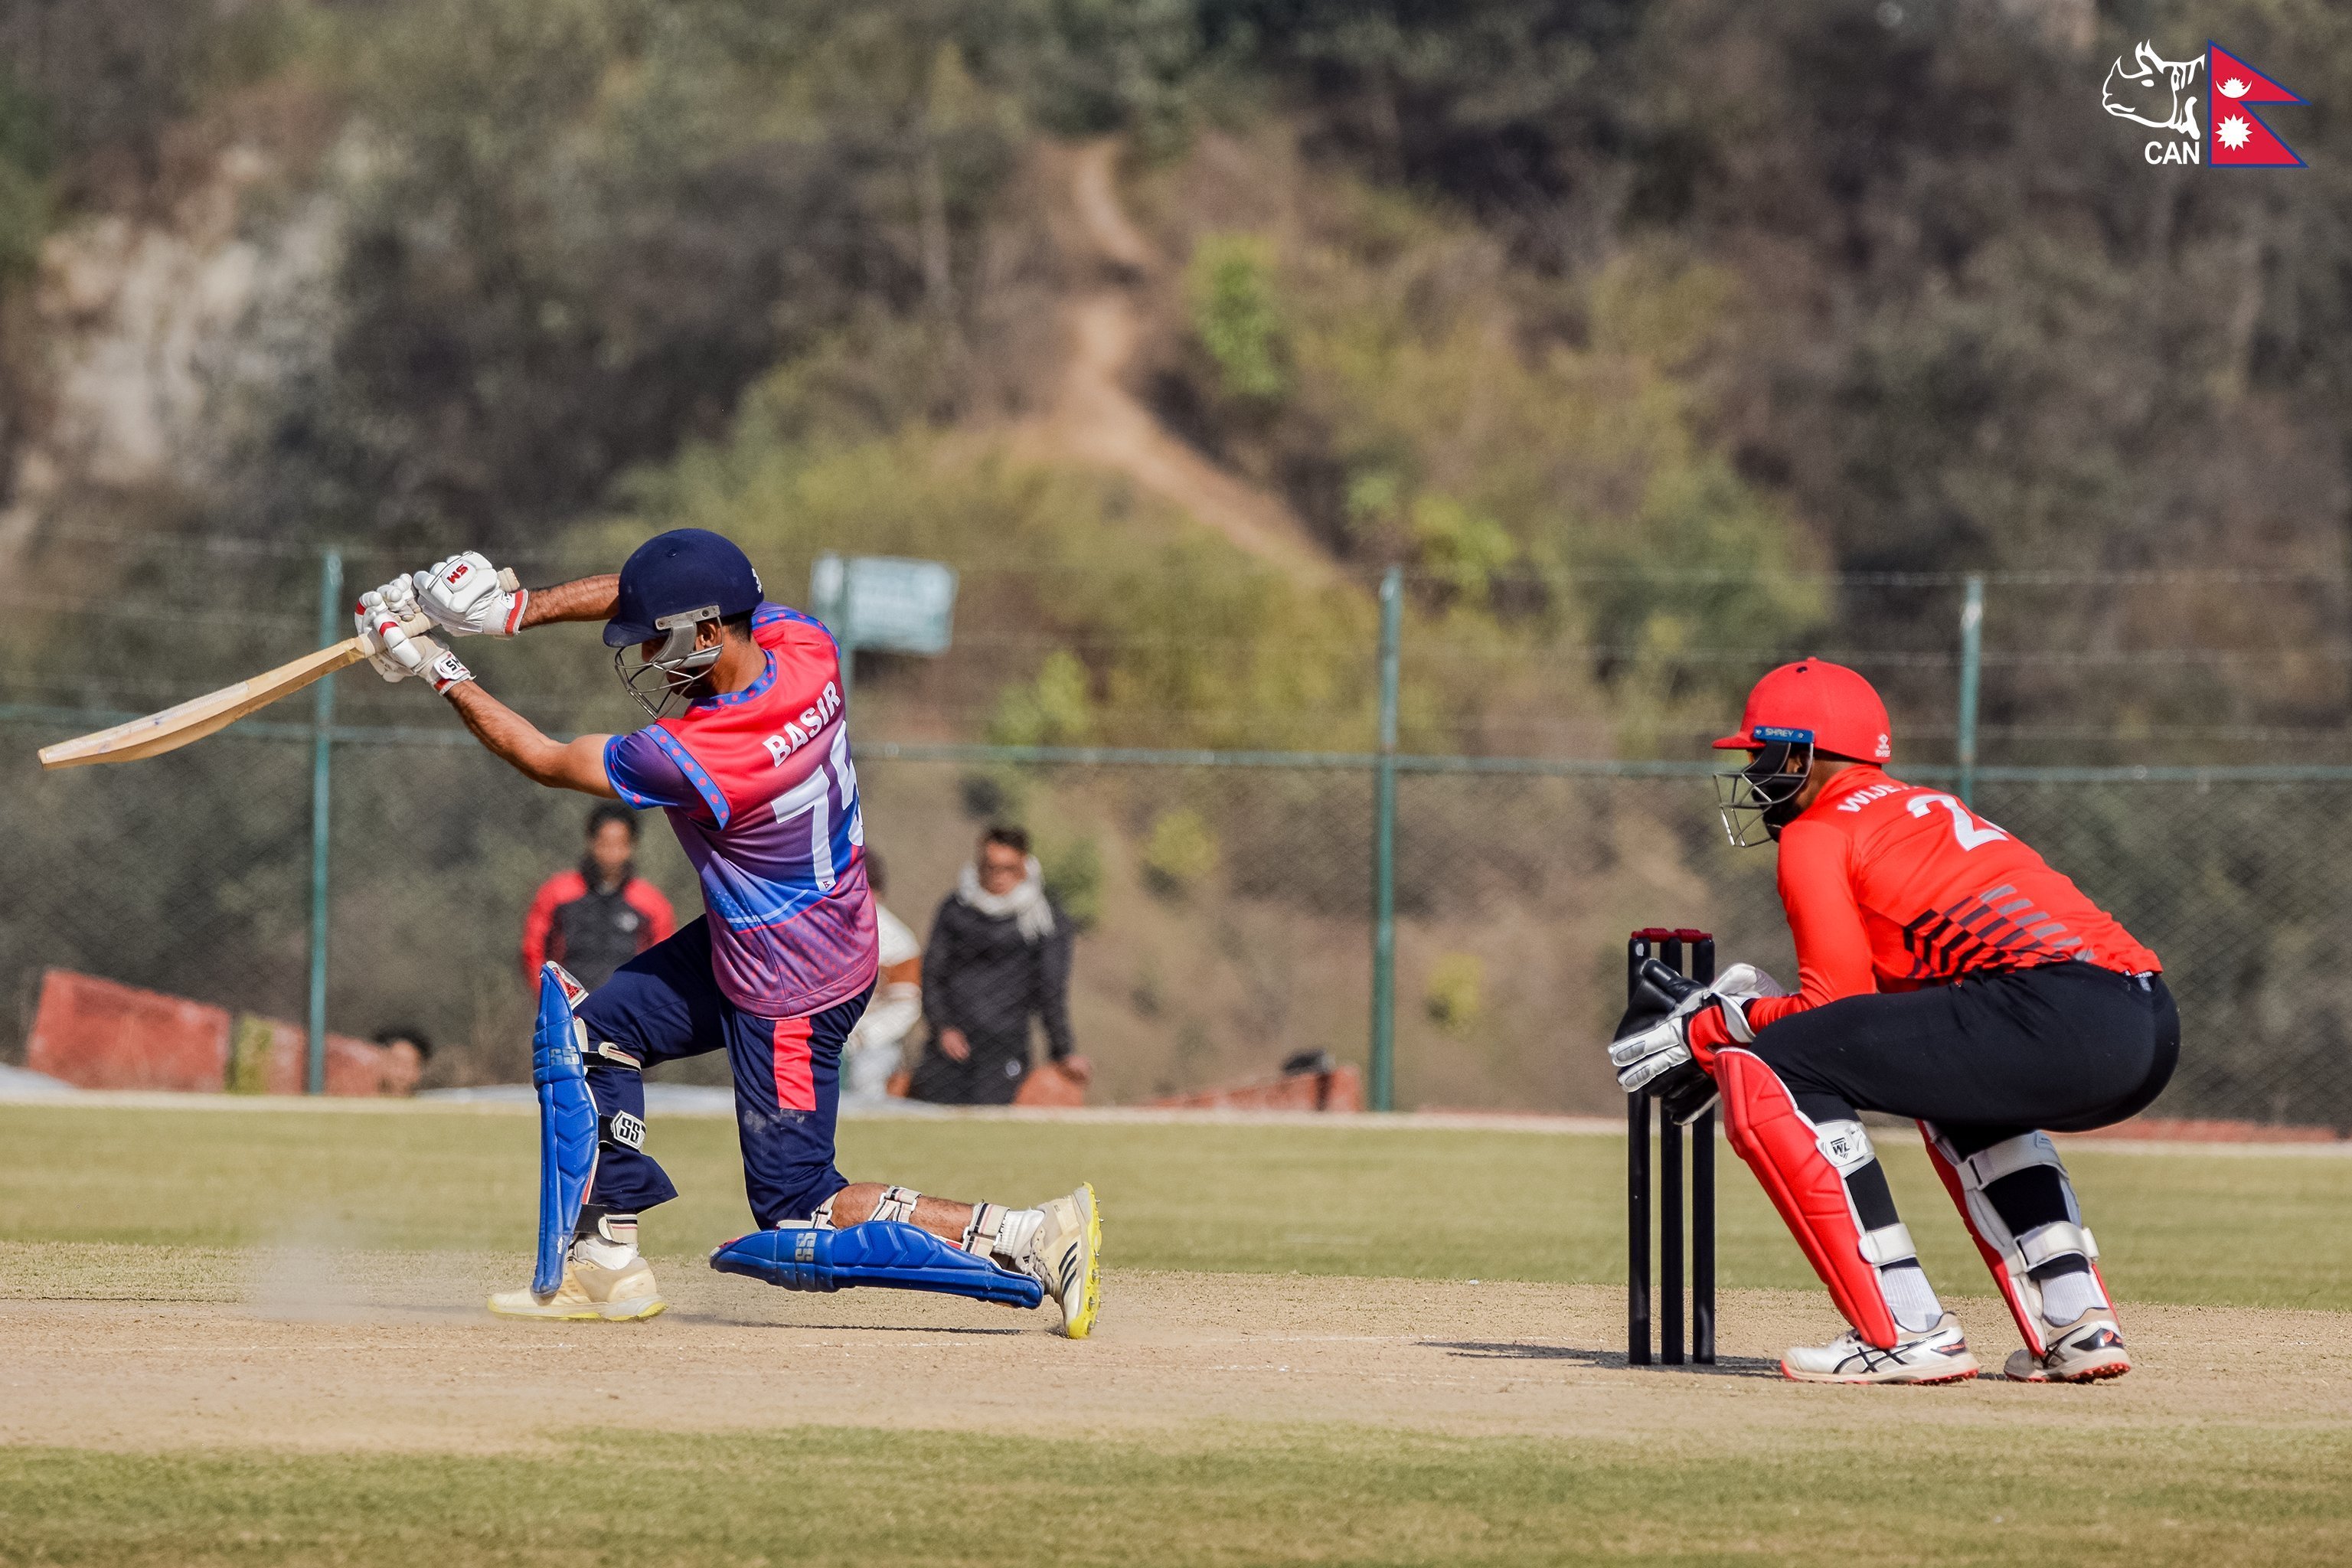 Nepal A and Canada XI gear up for ODI showdown today